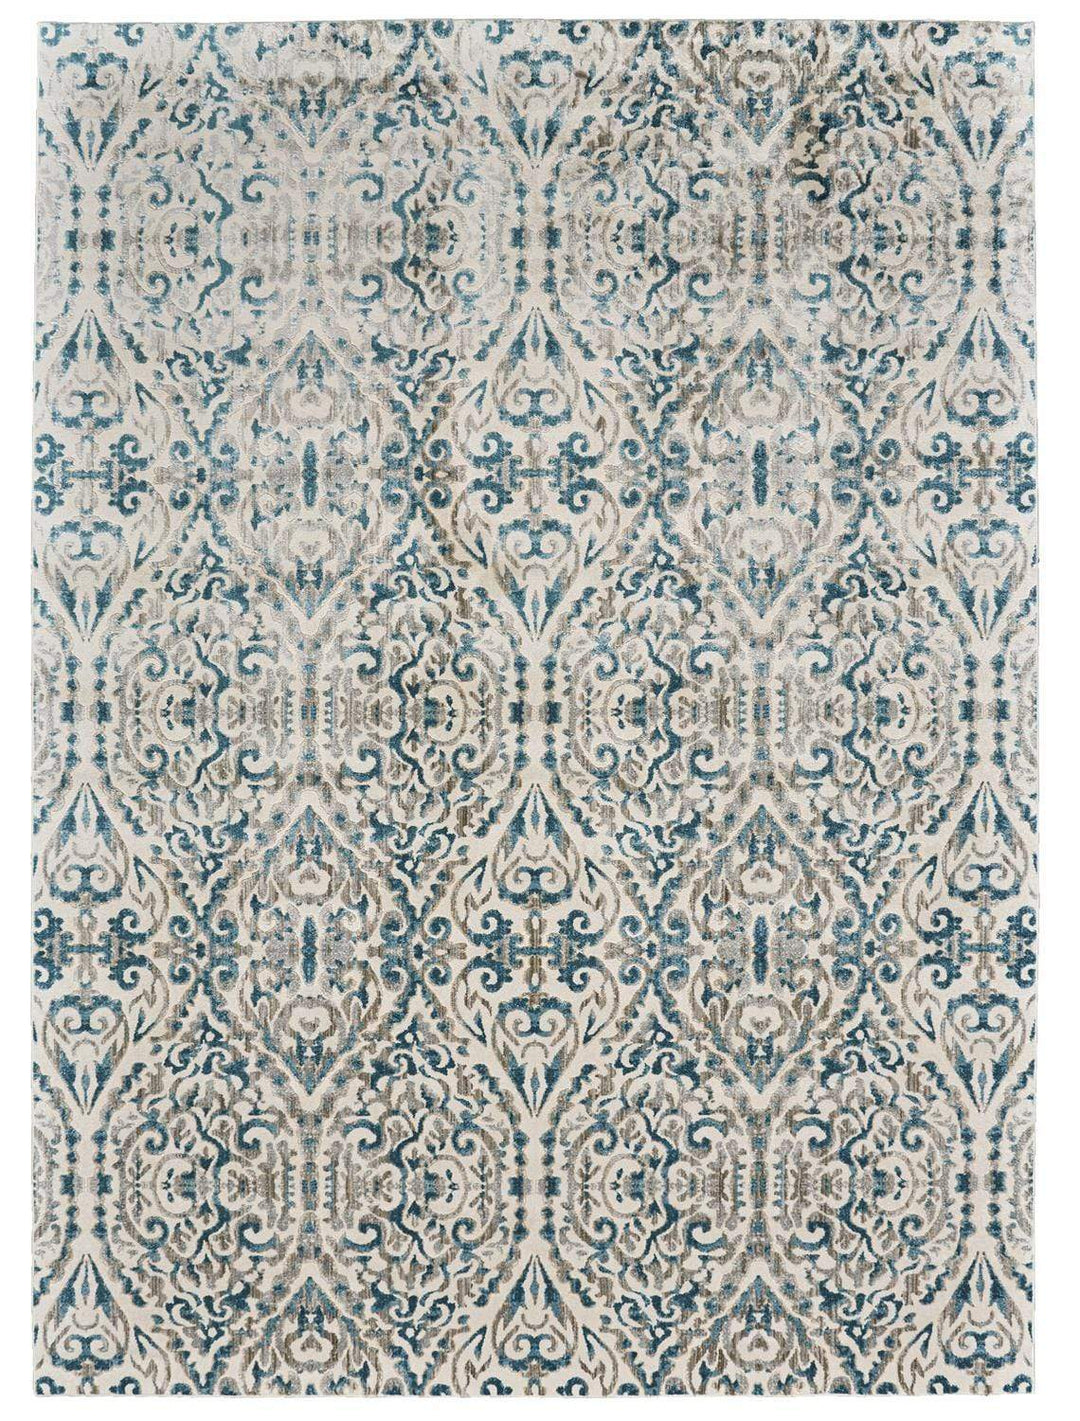 Feizy Feizy Home Keats Rug - Turquoise 2' 2" x 4' 6523466FTQS000A22